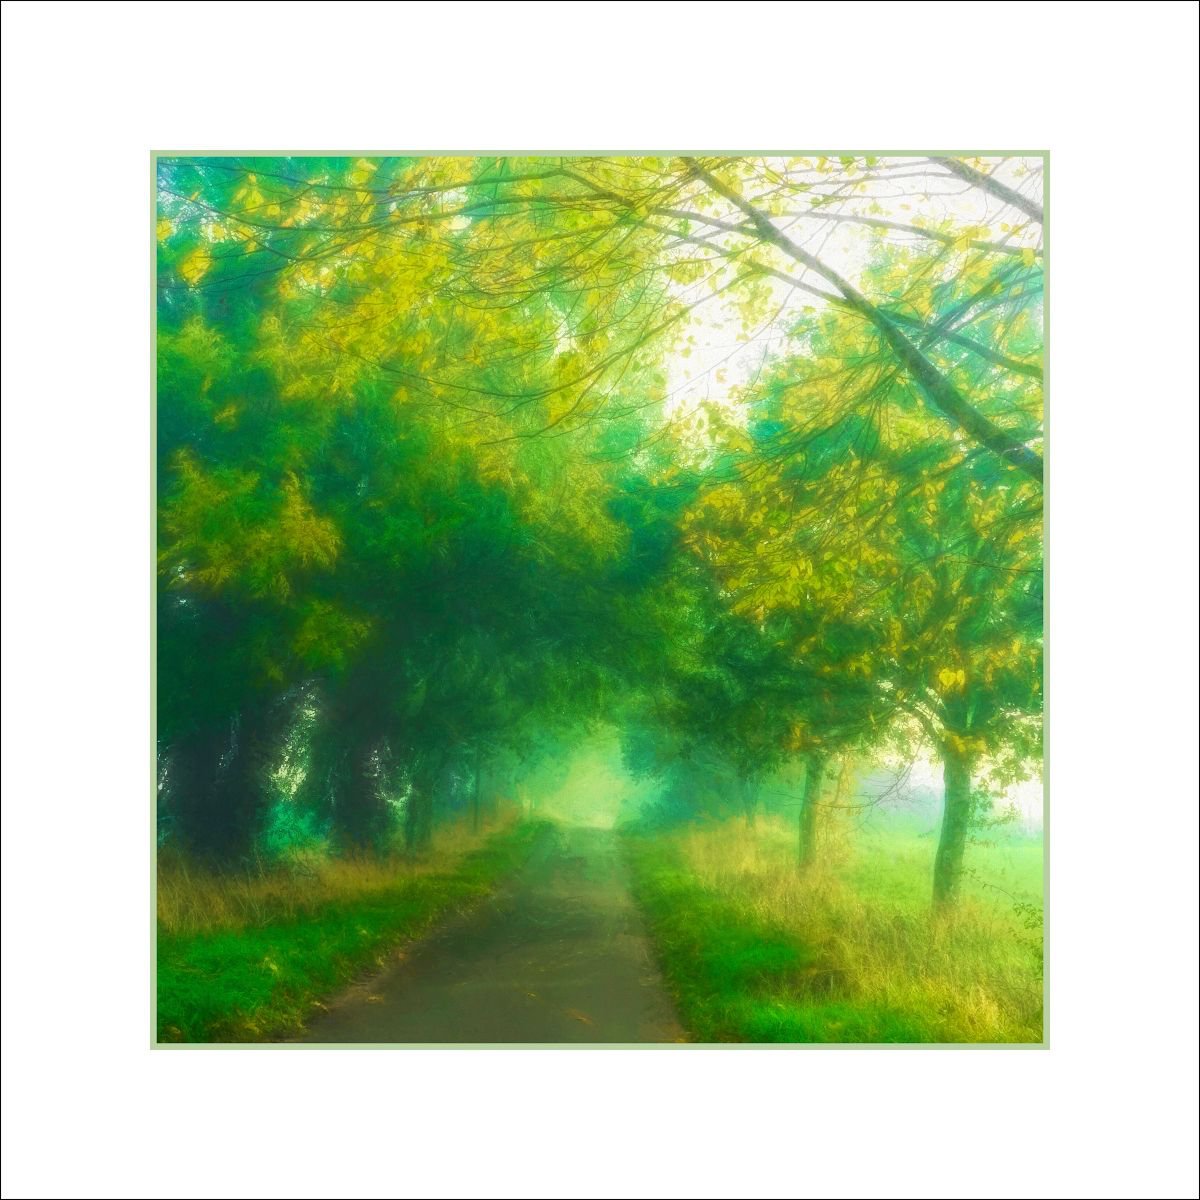 Misty Autumn road by Martin  Fry